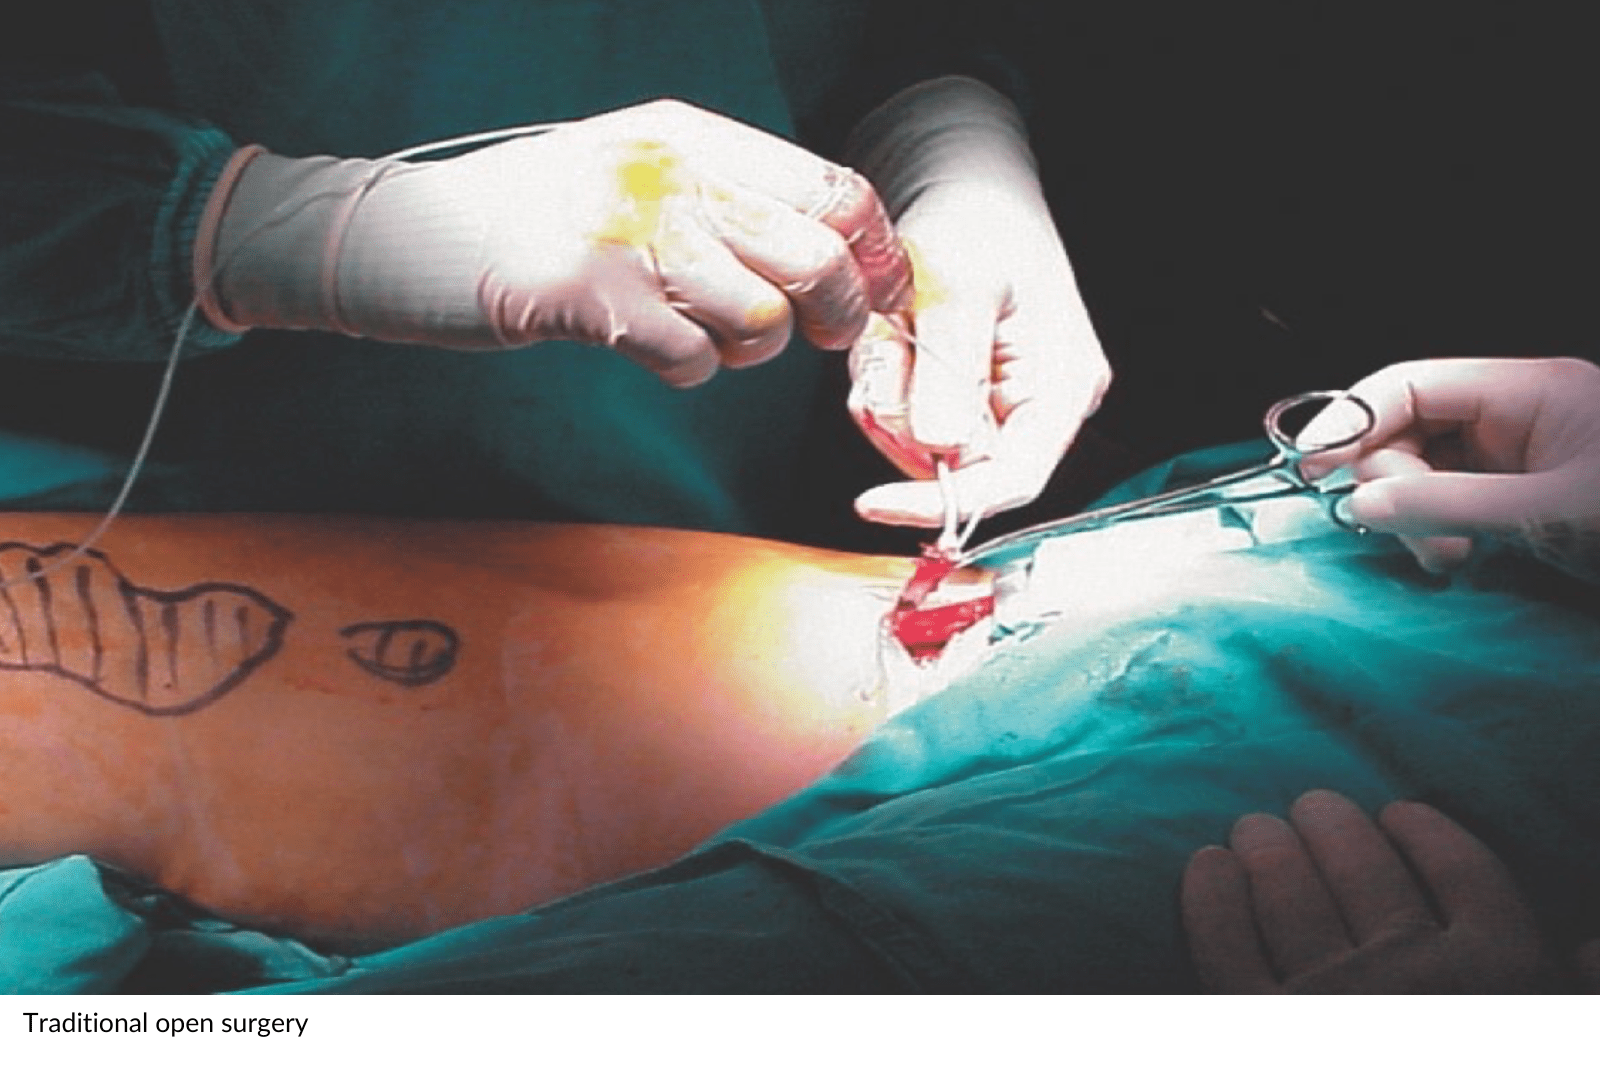 Traditional open surgery for varicose veins